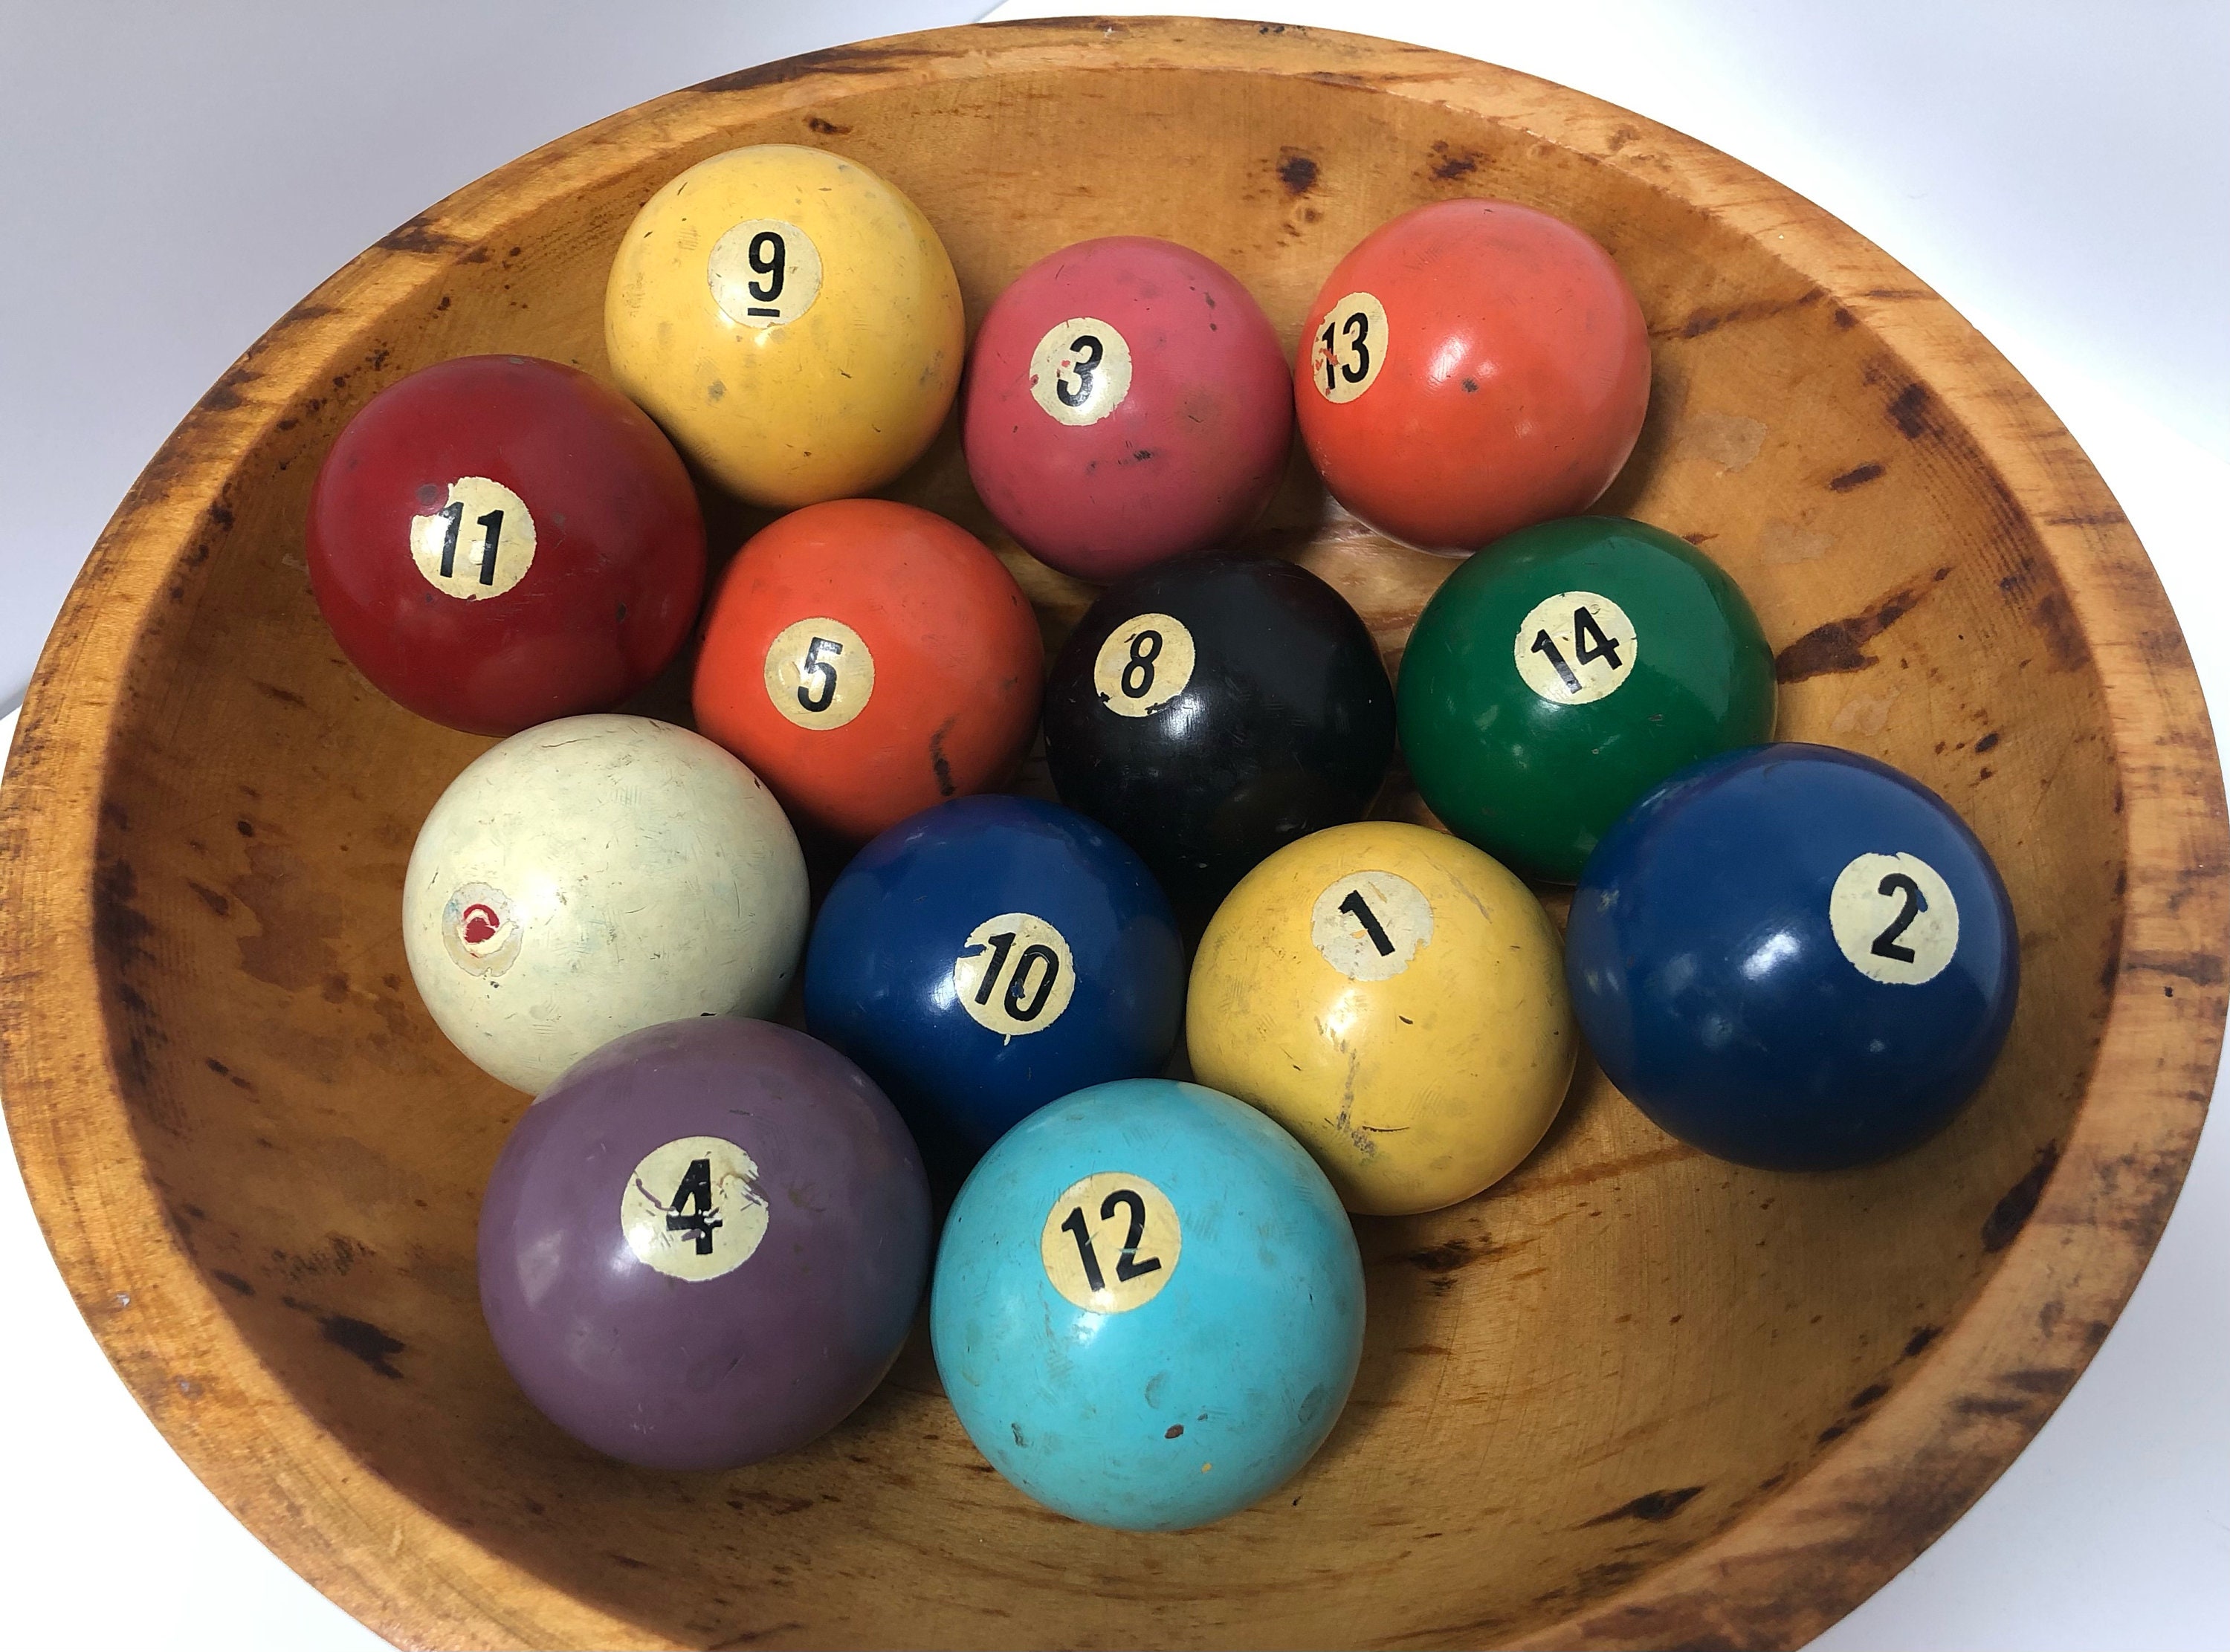 Classic Sport Official Size Billiard Pool Ball Set with Cue Ball